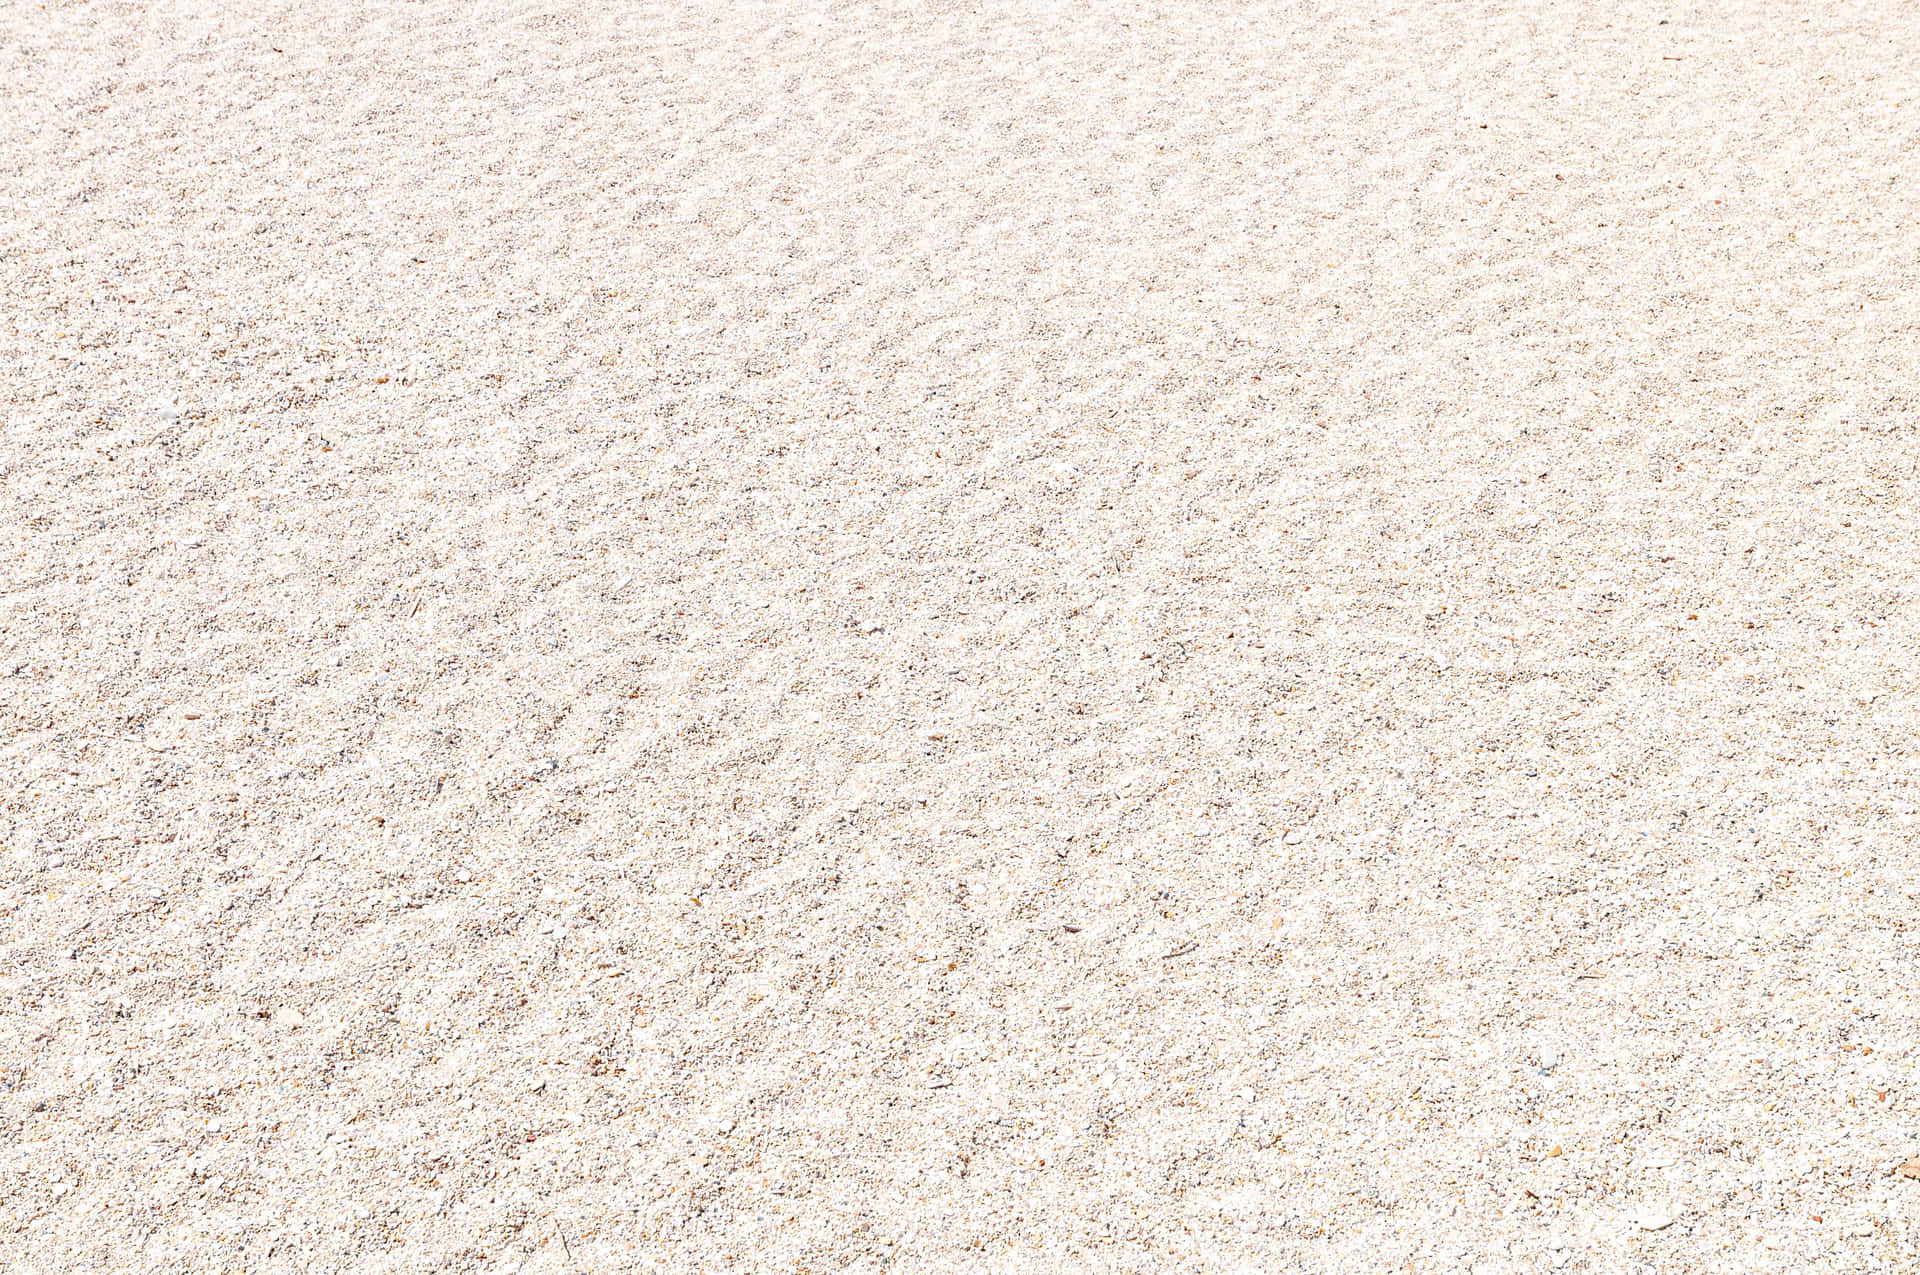 A beautiful view of white sand beneath a clear, blue sky